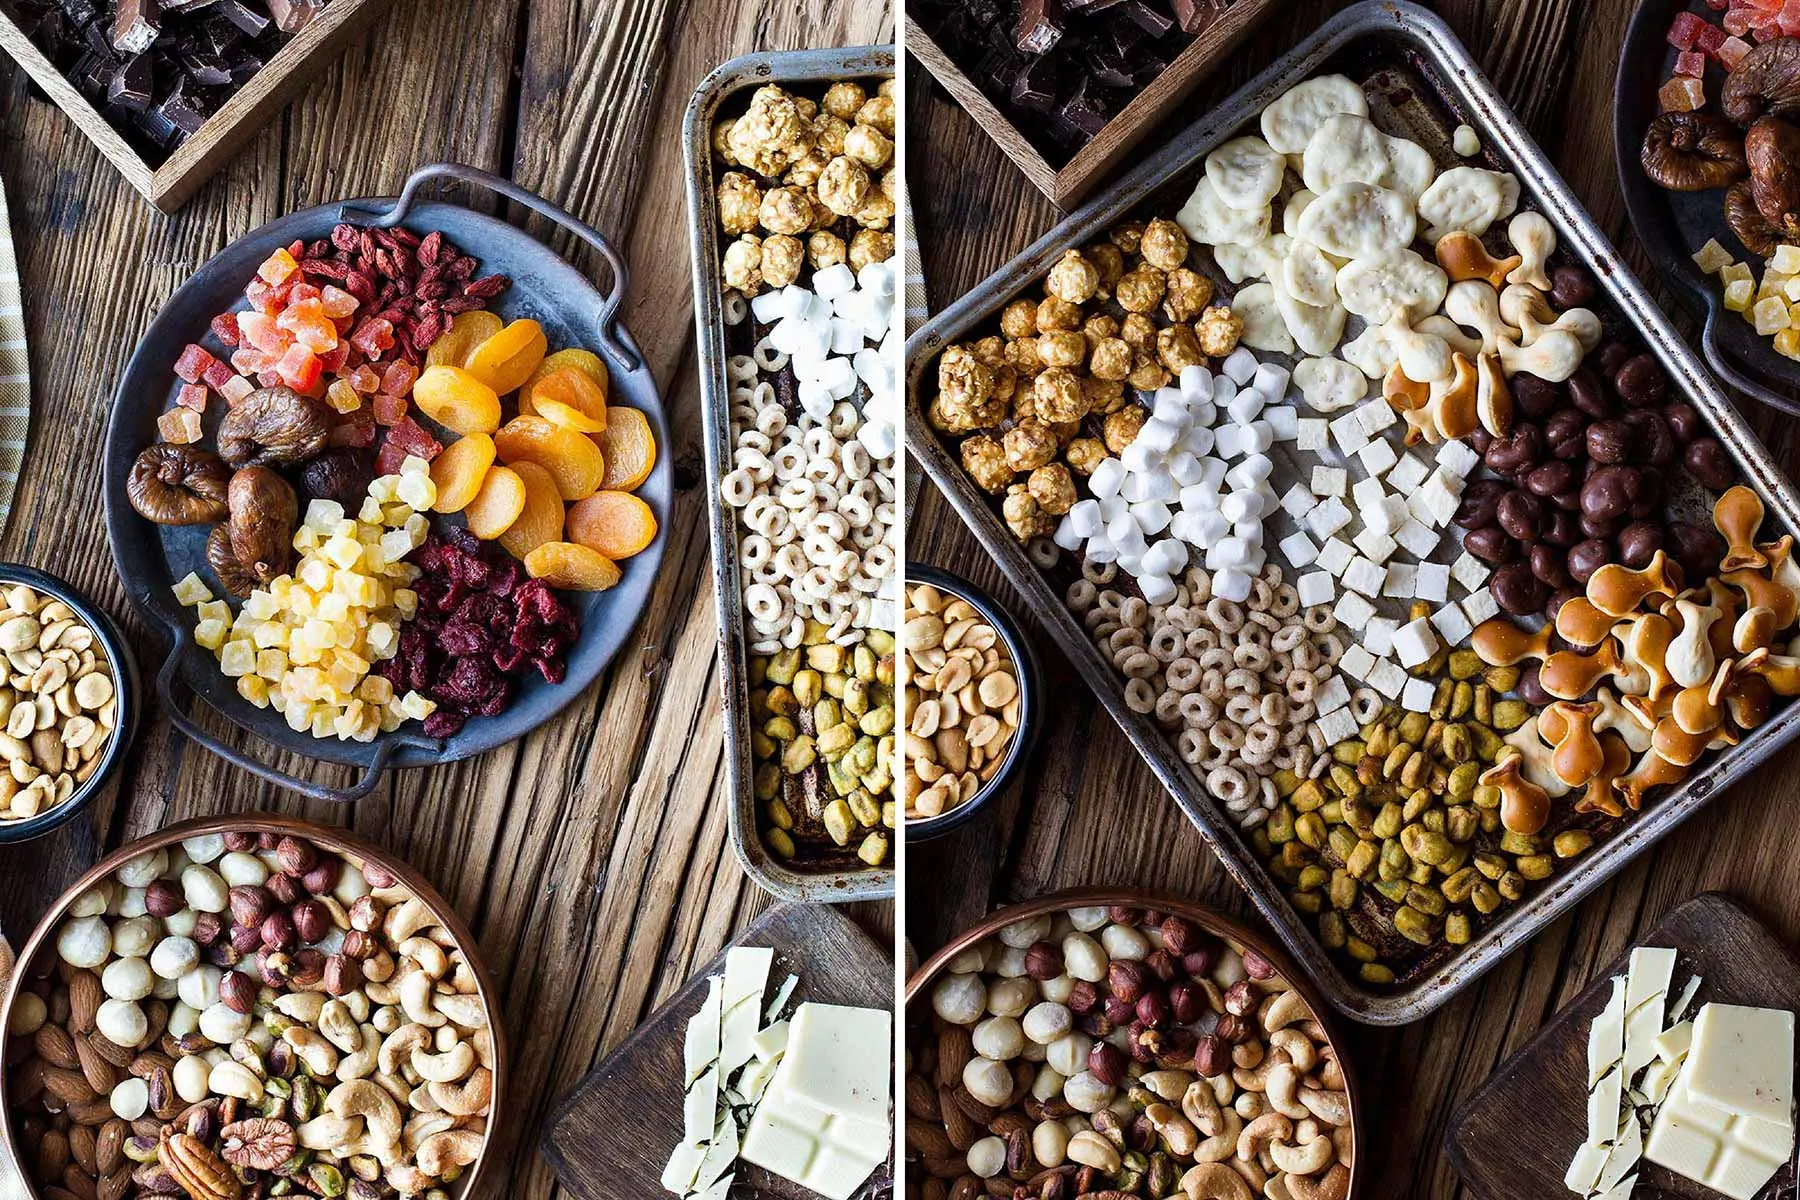 A diptych of the dried fruits and the unexpected elements.